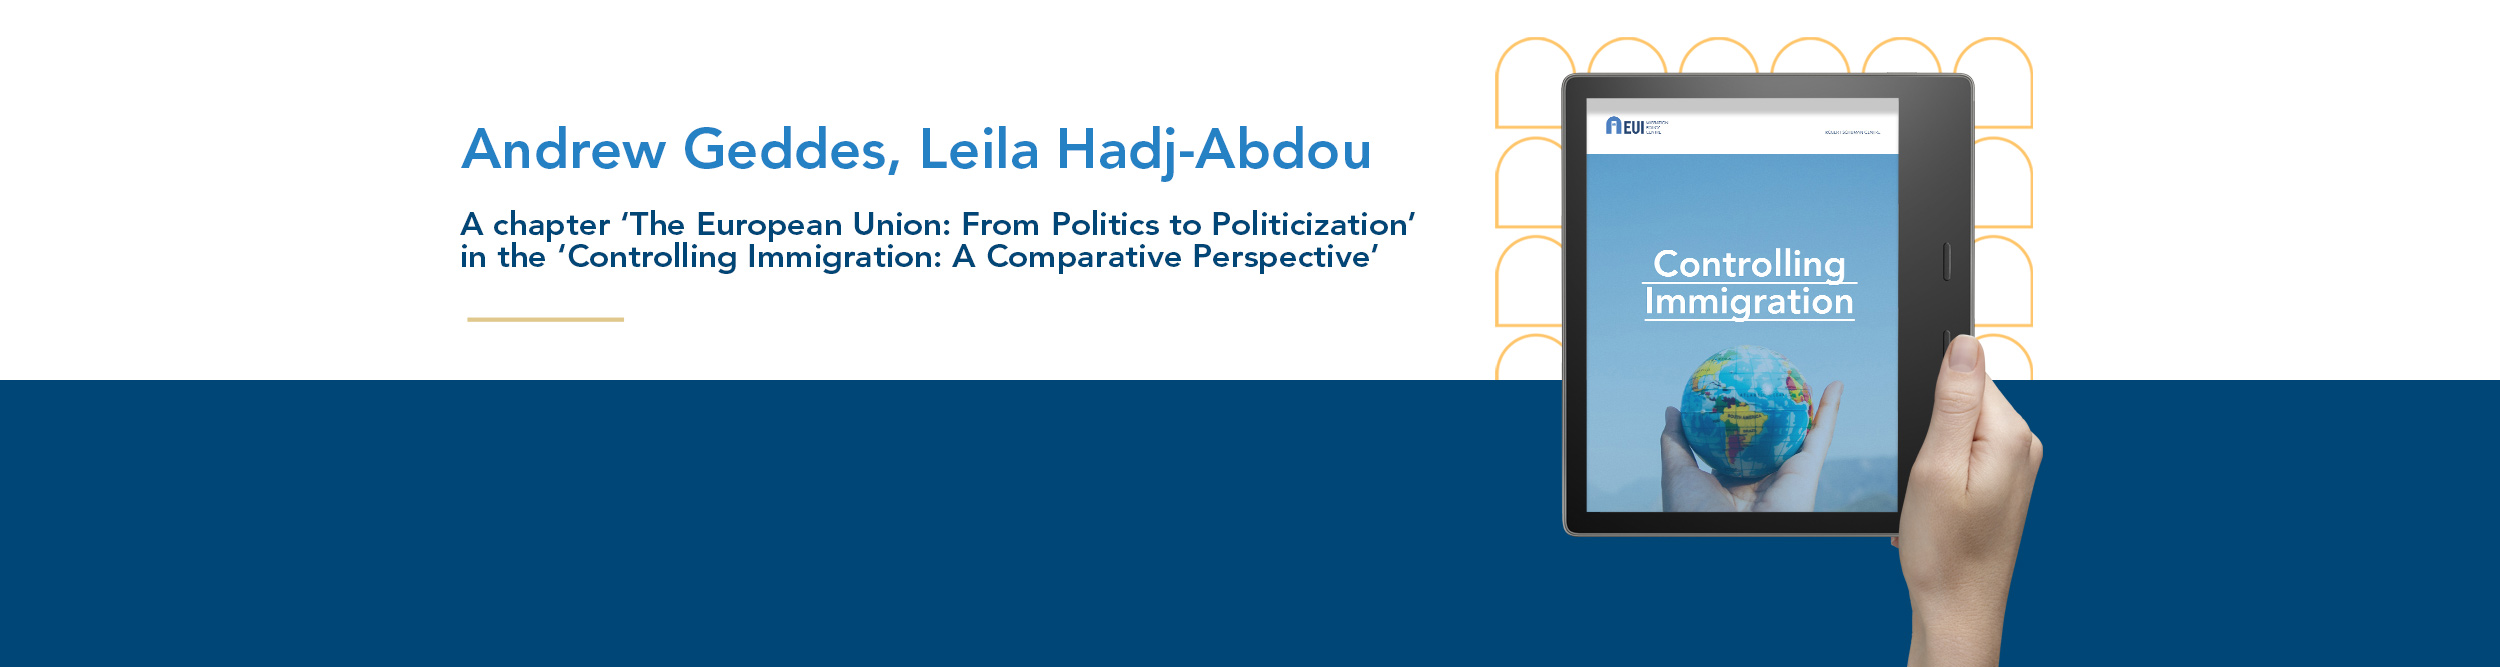 Permalink to:Andrew Geddes and Leila Hadj-Abdou have contributed a chapter to the 4th edition of this migration studies classic